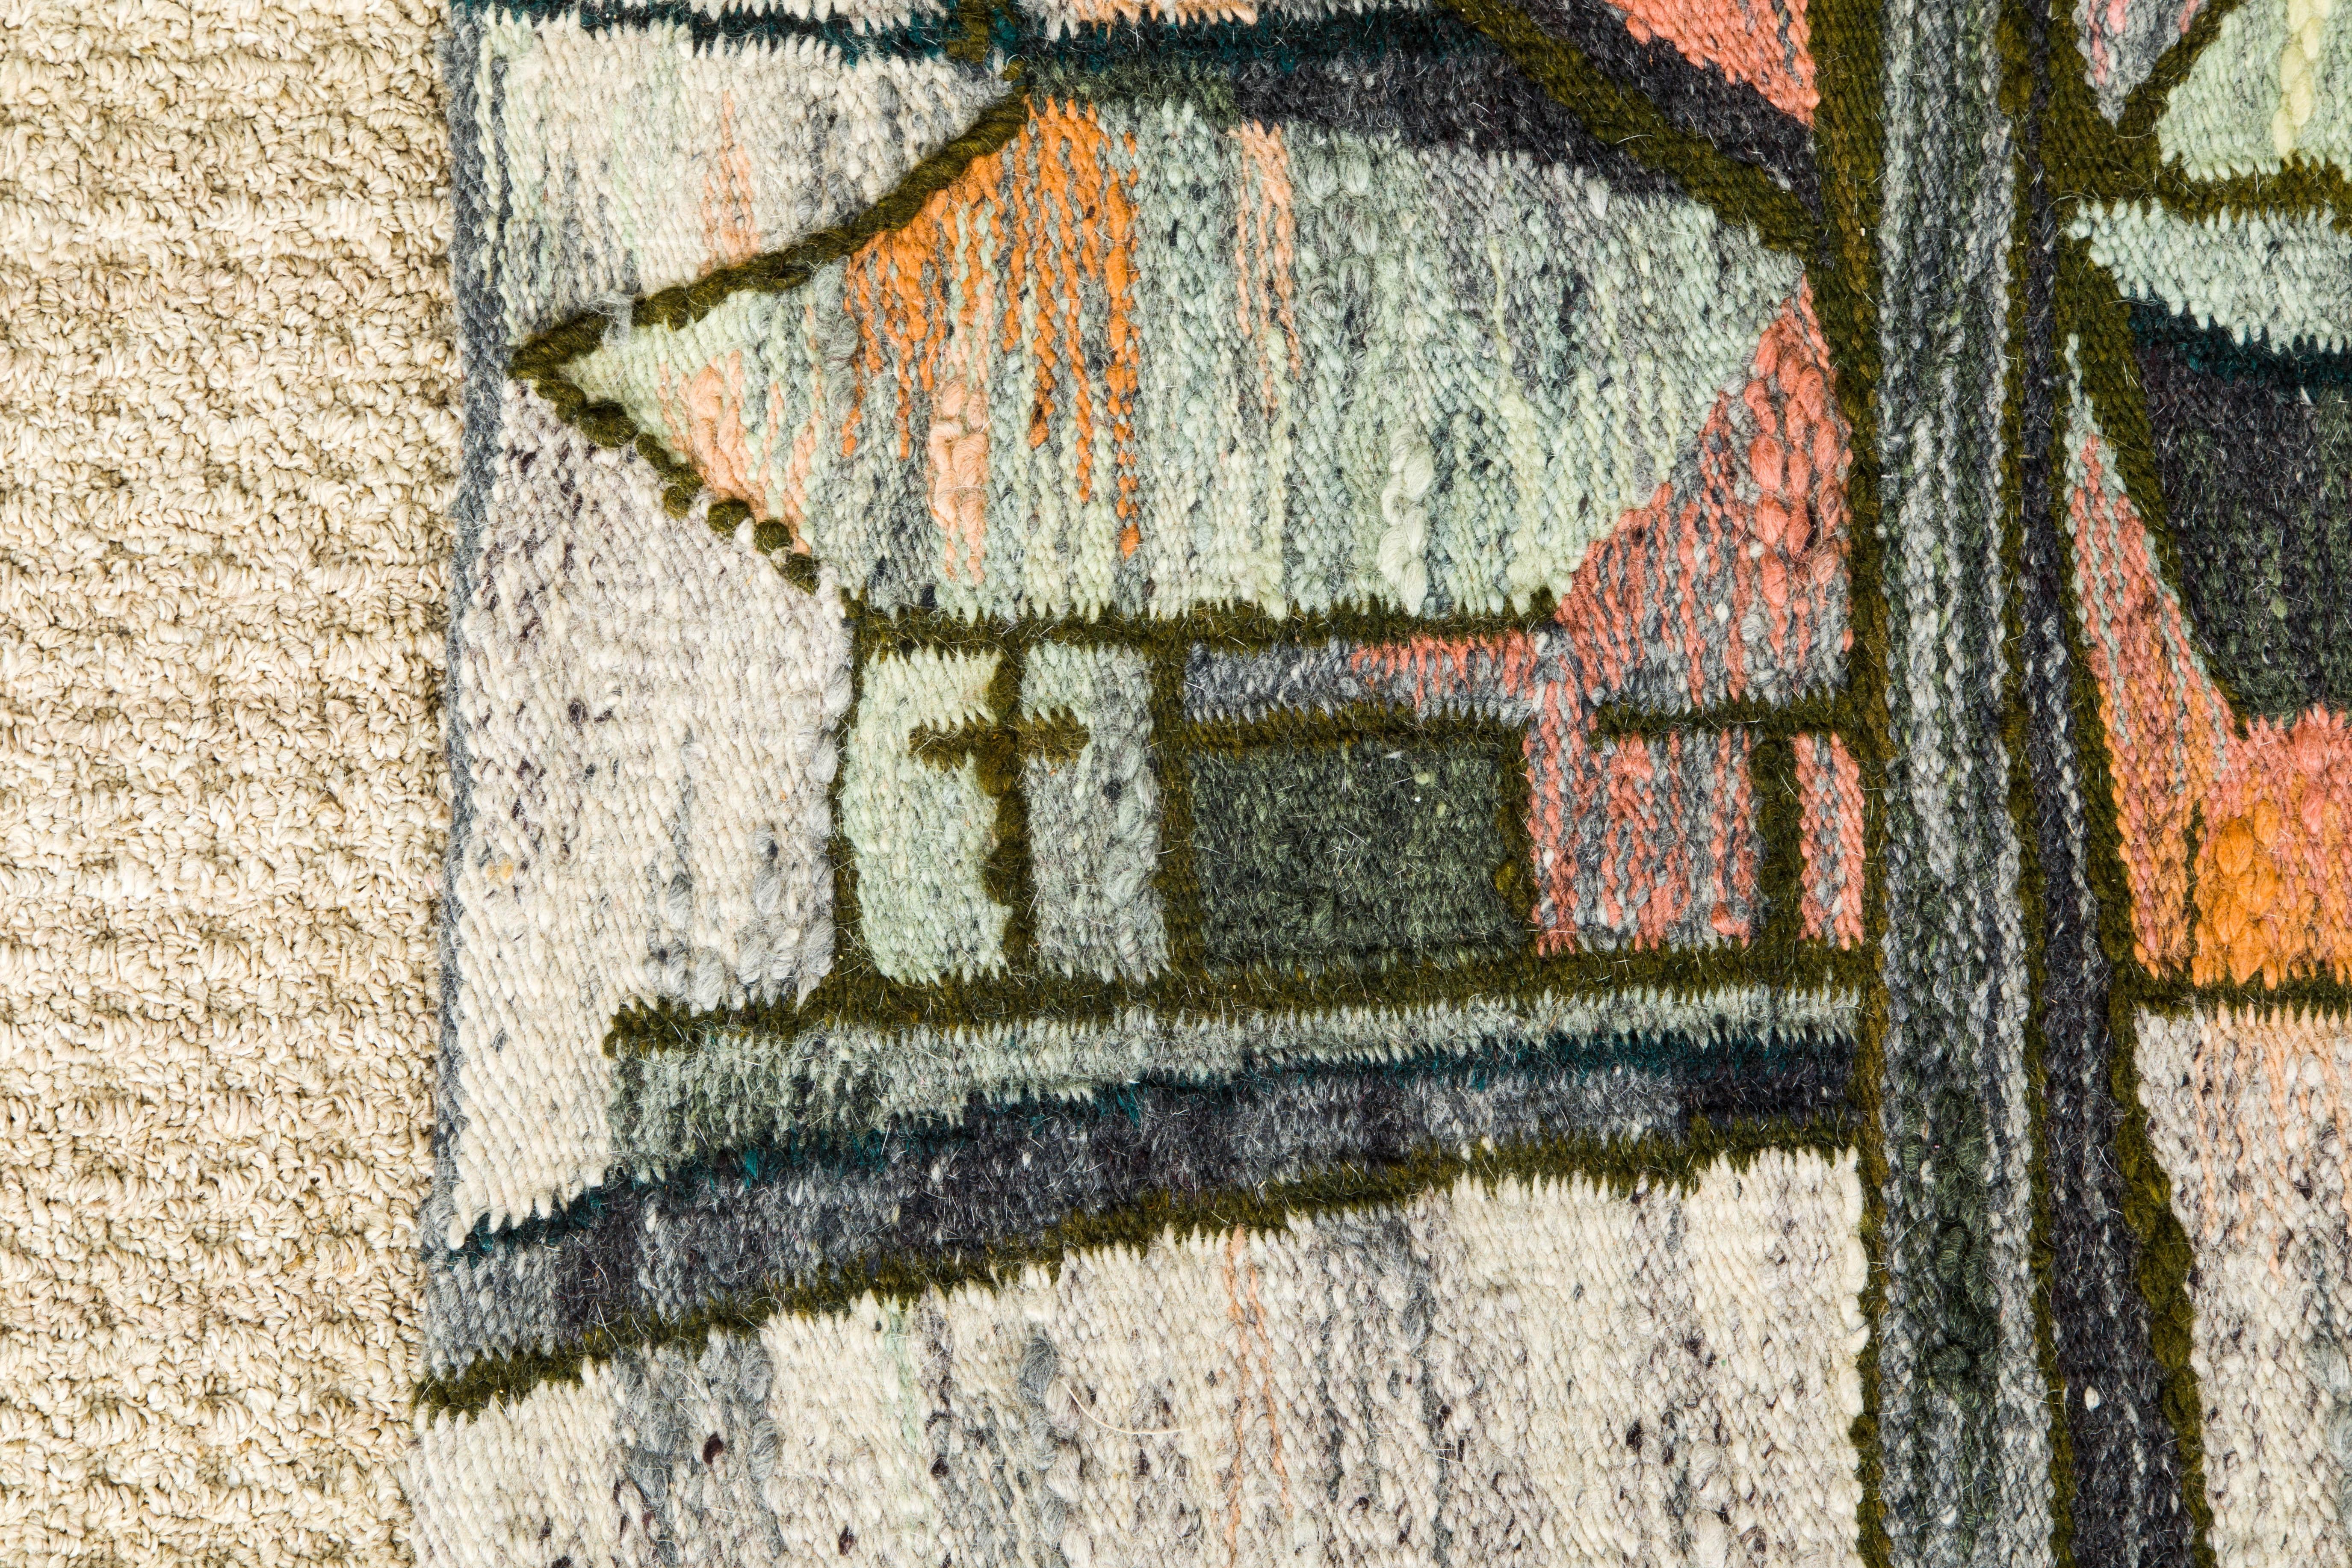 'A White Stream' Wool Tapestry or Rug by H. Sulkowska for Cepelia c 1960, Signed For Sale 5